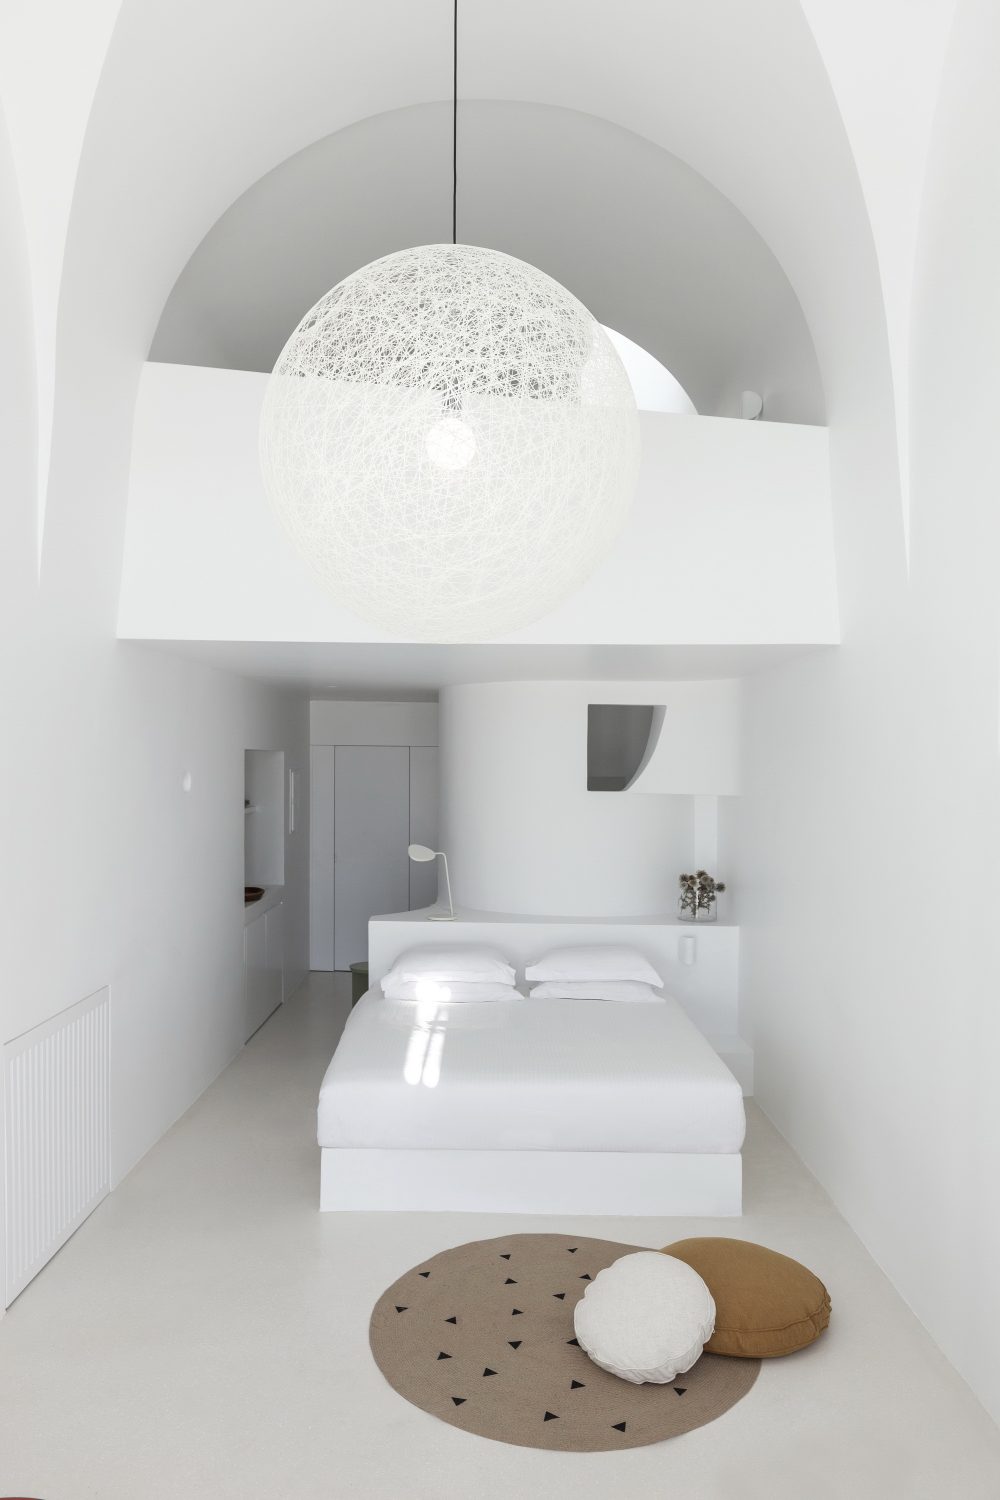 Summer Cave House in Santorini by Kapsimalis Architects